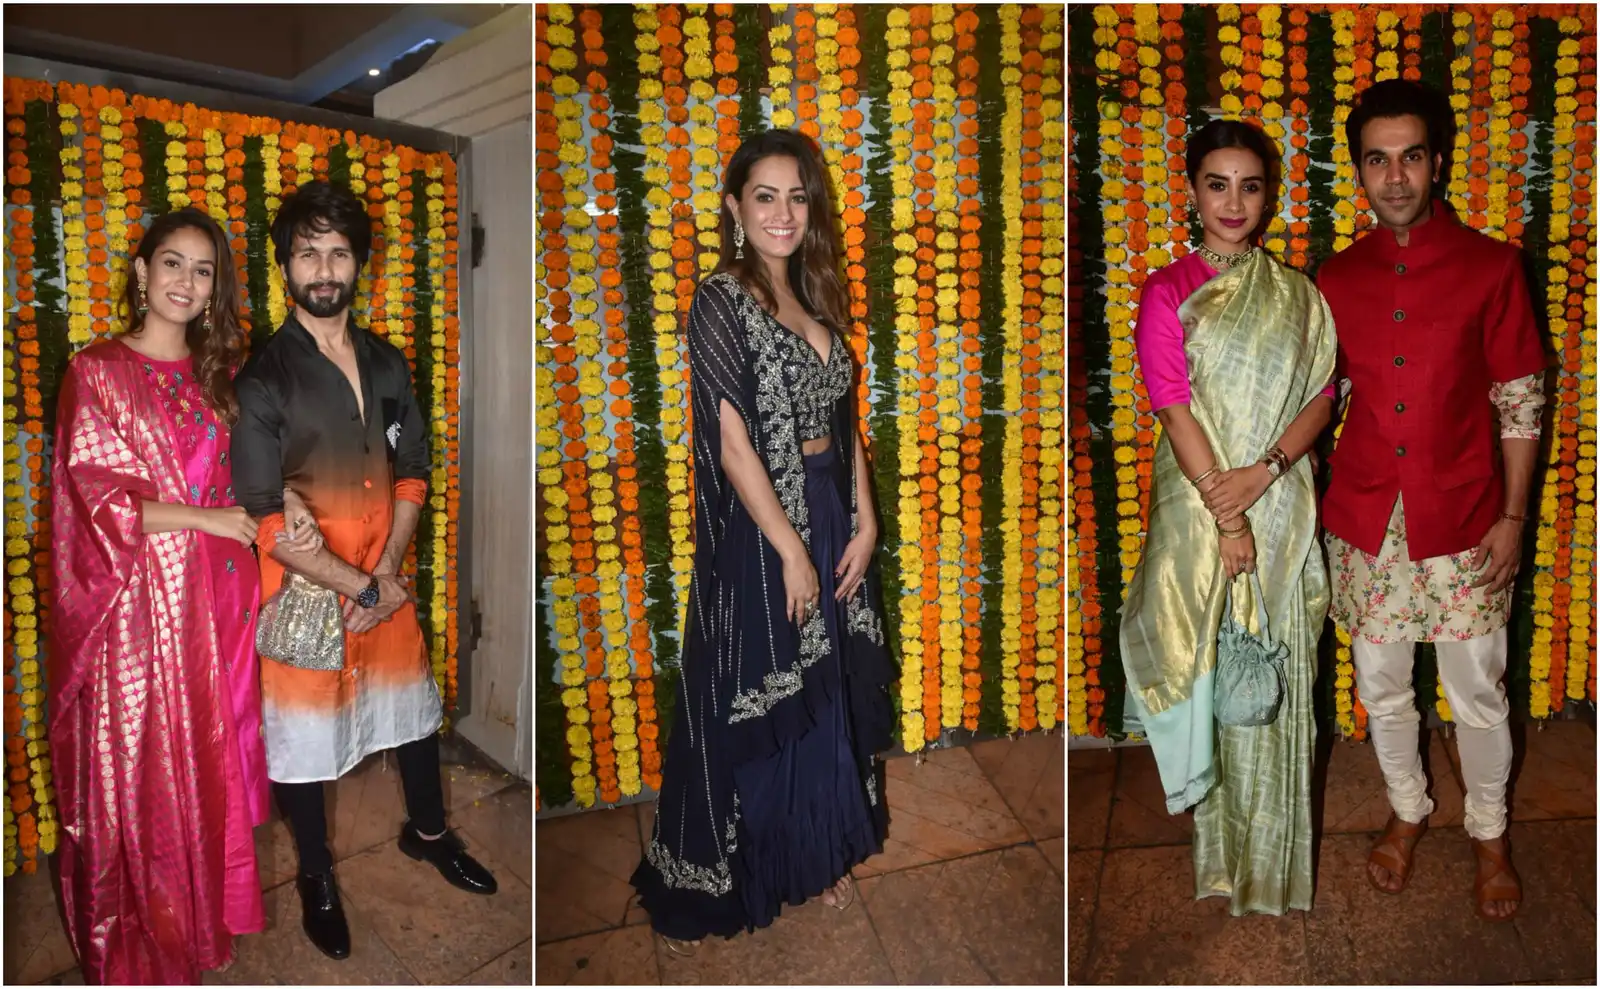 Ekta Kapoor’s Diwai Bash Turns Into A Gala Affair With Bollywood And TV Celebs All Under One Roof